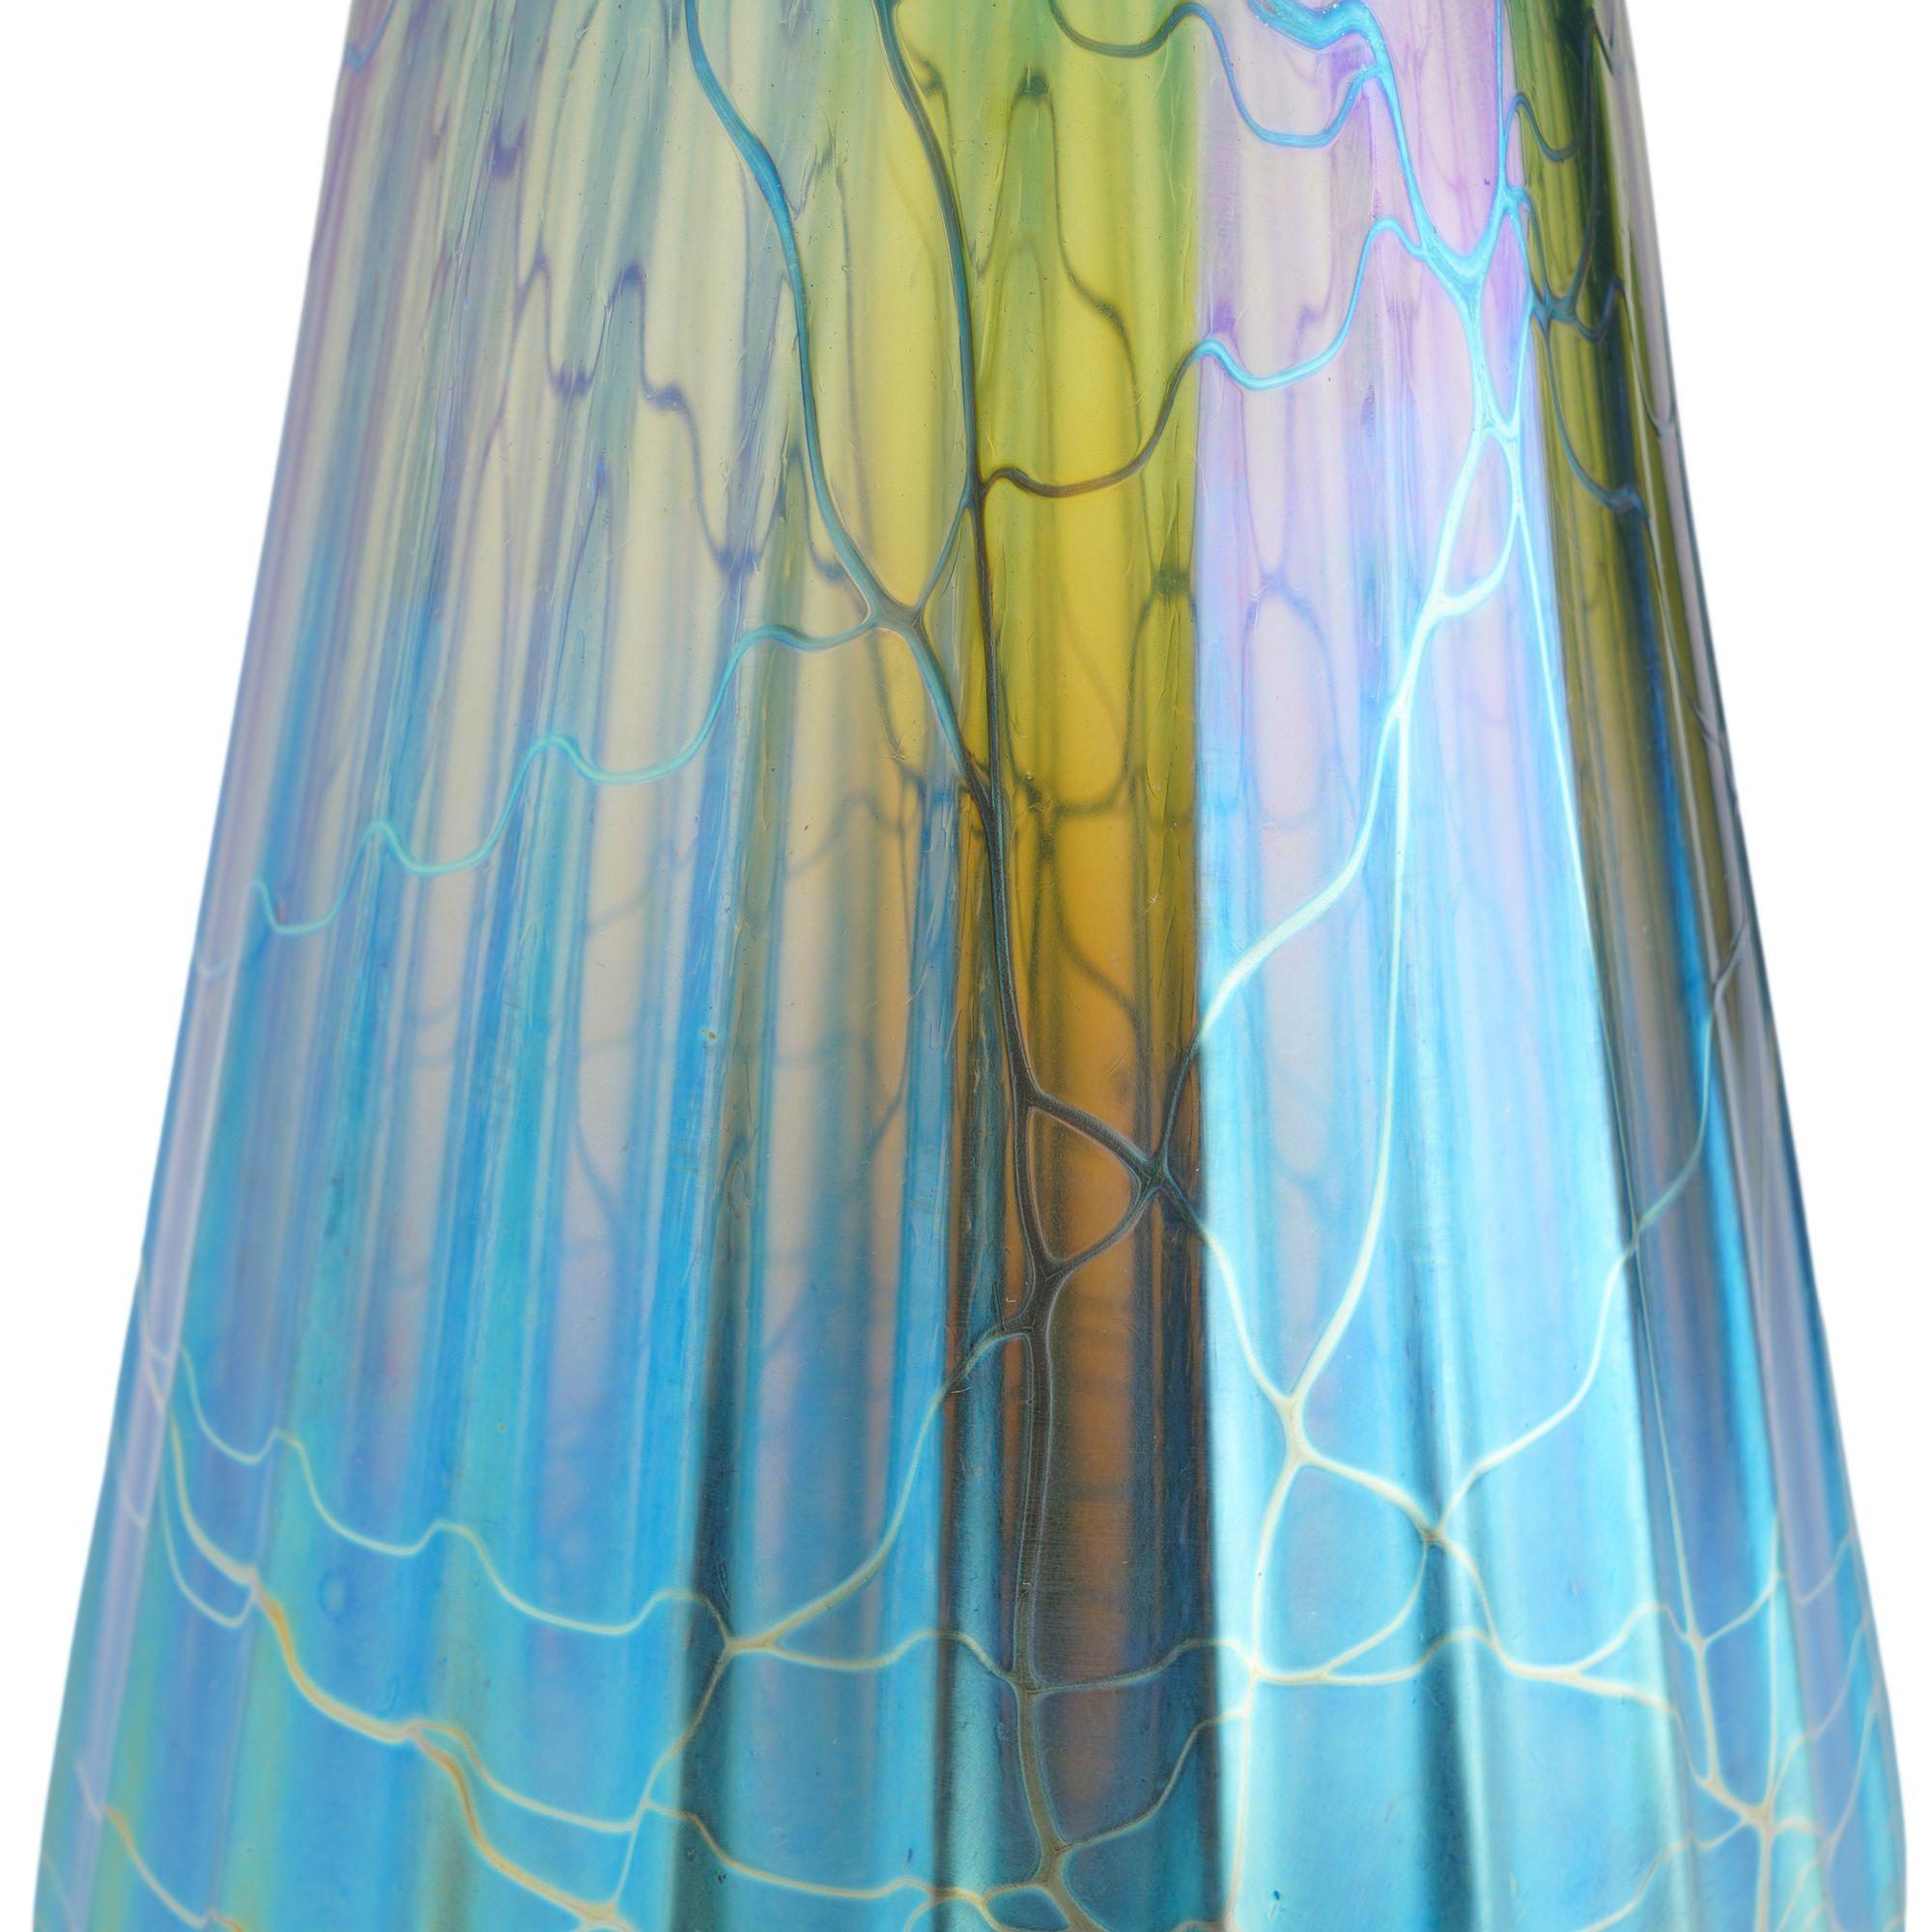 Contemporary iridescent blue blown glass vase by Mayauel Ward, 2015 For Sale 6